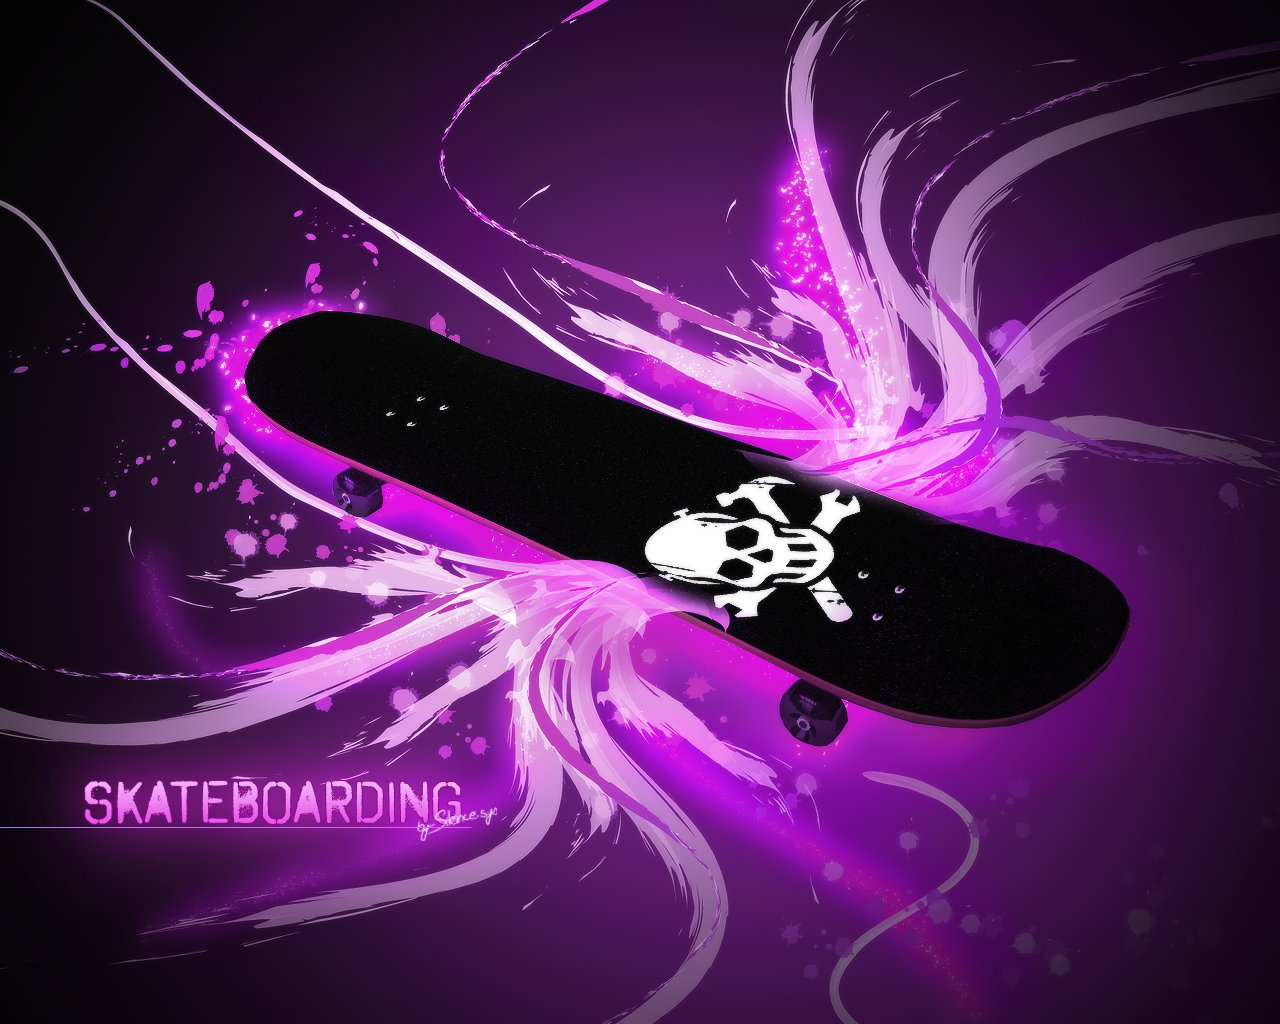  Crazy Cool Wallpapers for Skateboarders Blaberize